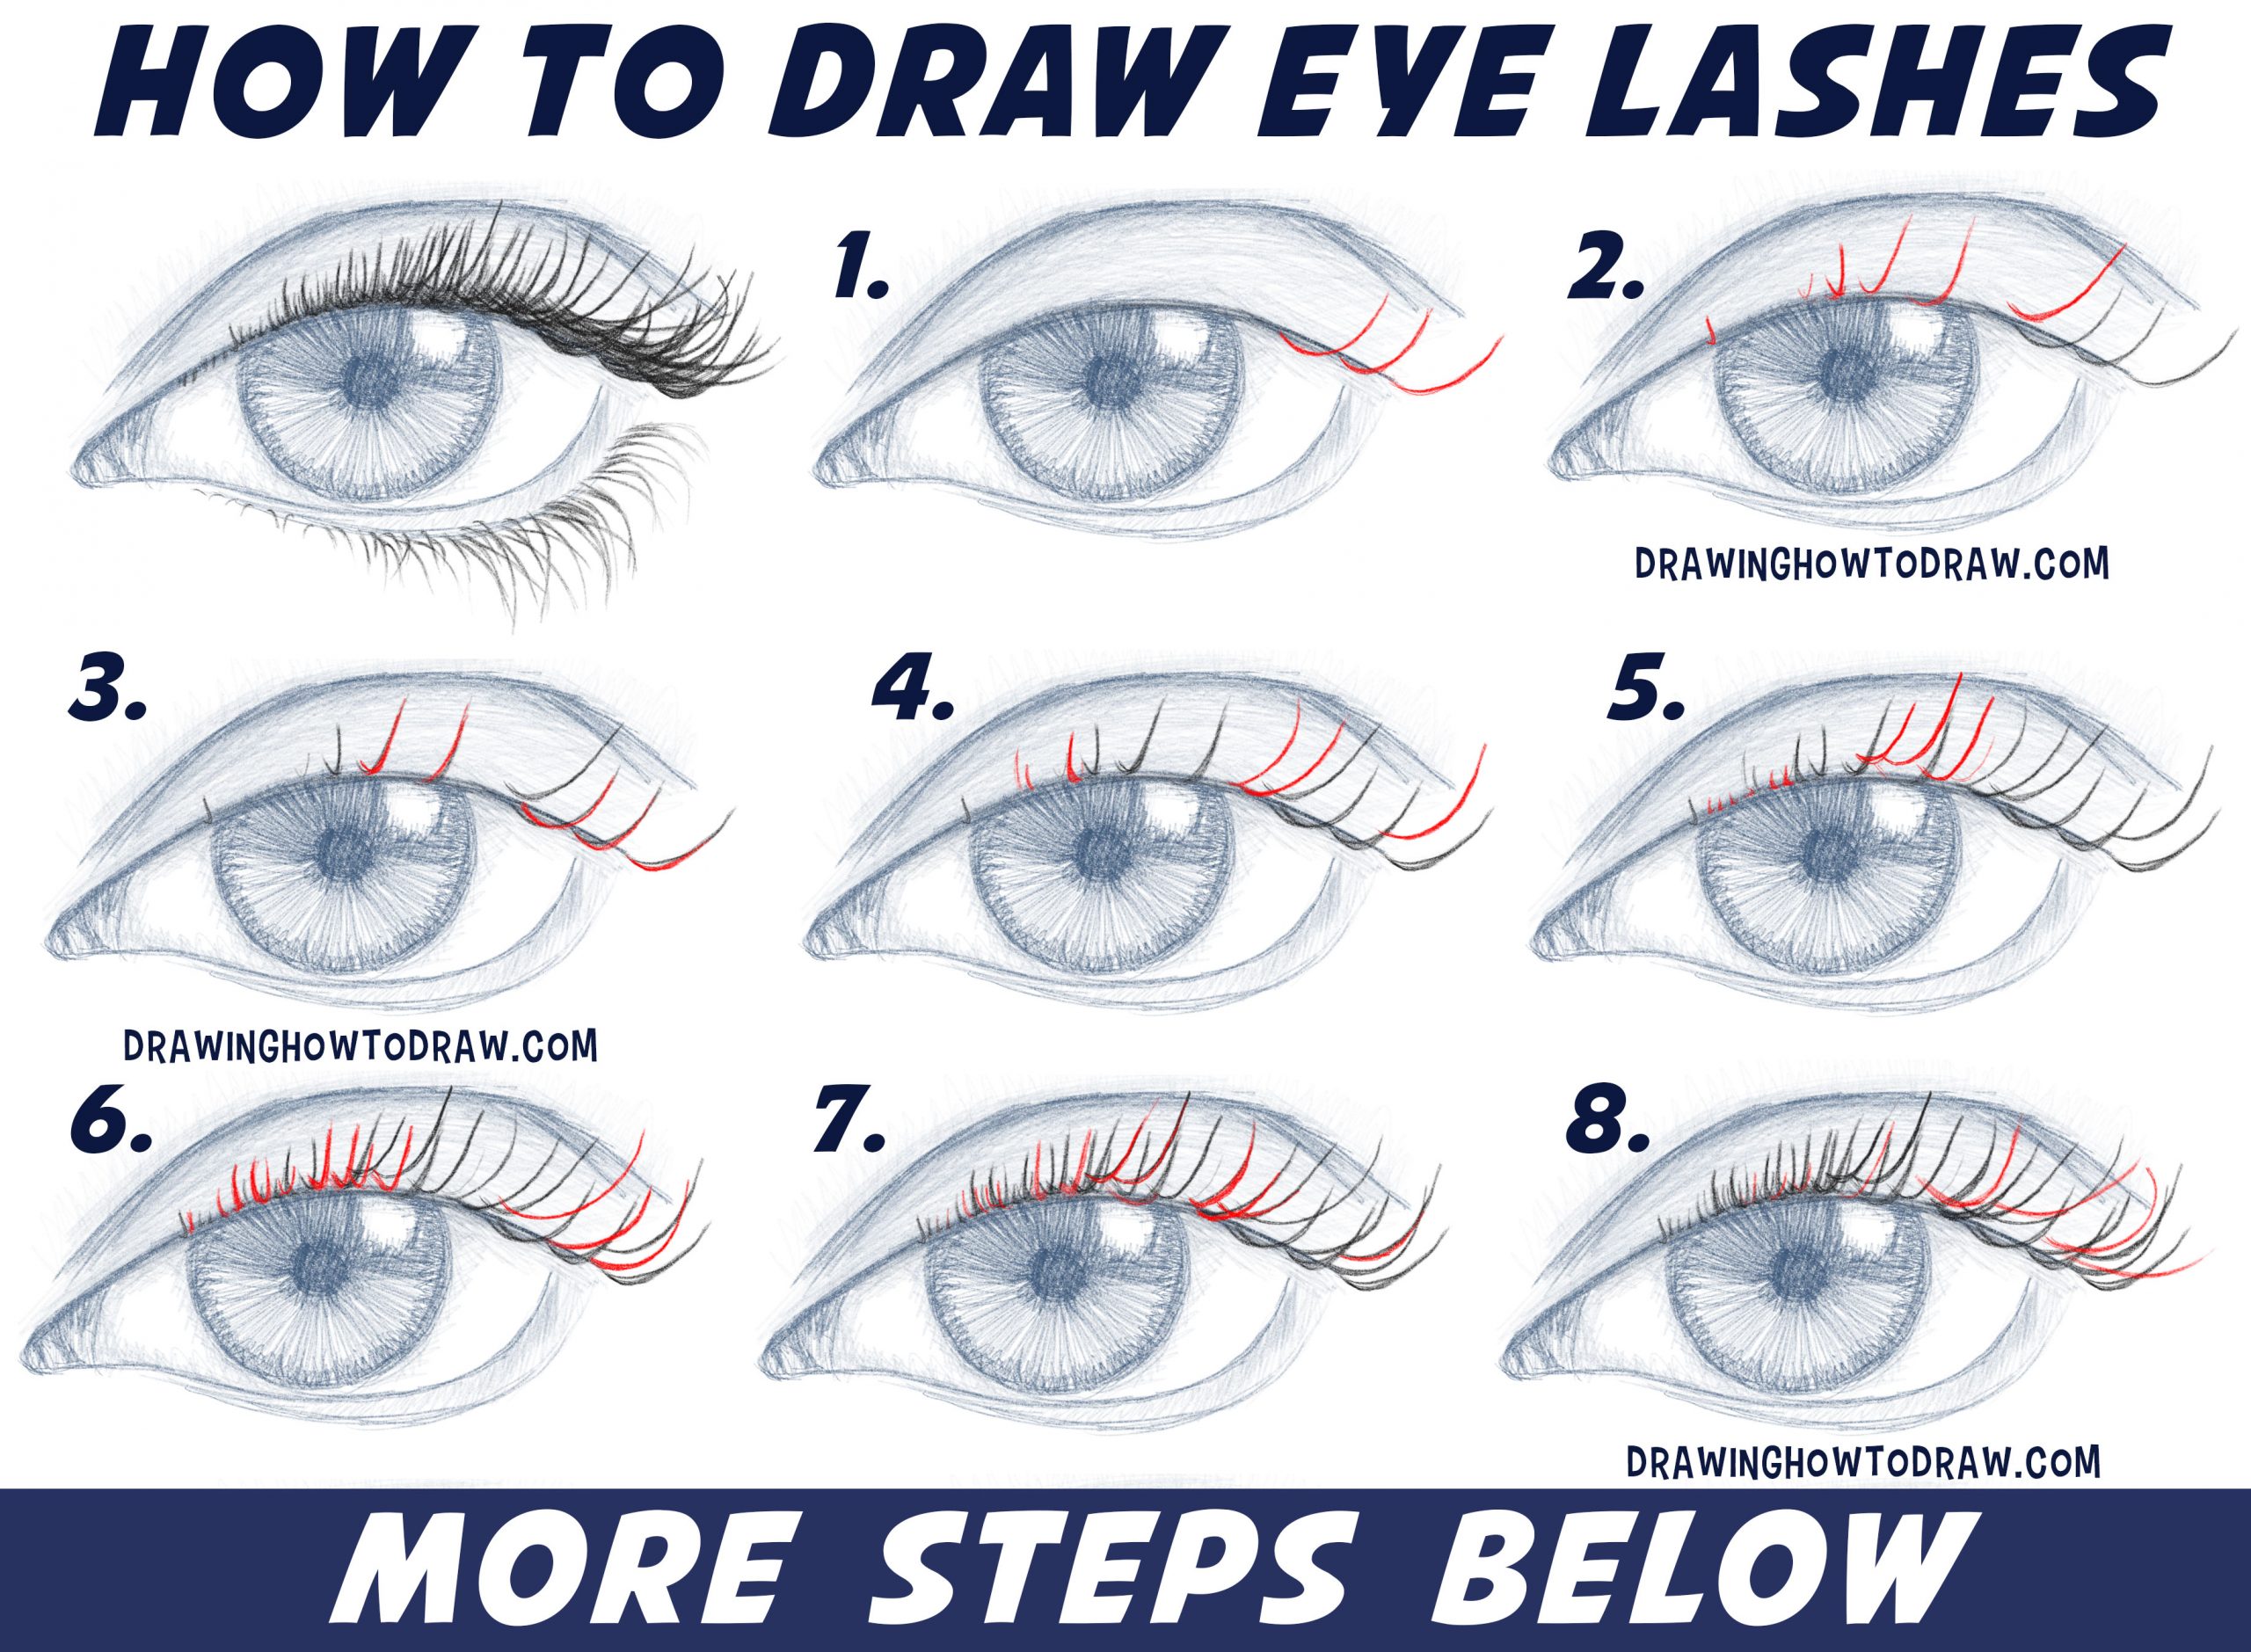 How to Draw Eyelashes Step by Step?